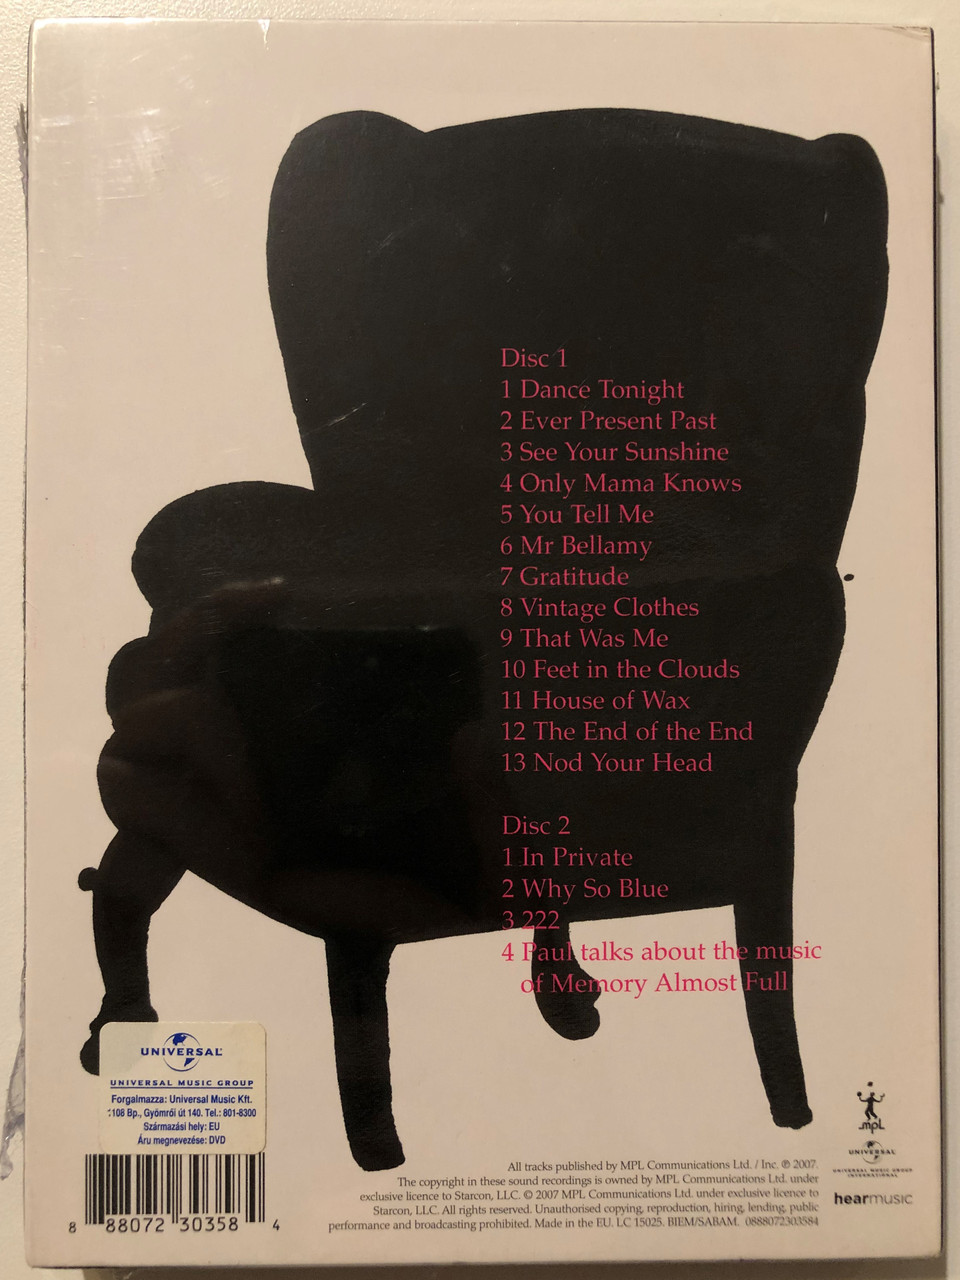 Memory_Almost_Full_Deluxe_Limited_Edition_McCartney_Paul_All_tracks_published_by_MPL_Communications_Ltd._UNIVERSAL_MUSIC_GROUP_DVD_3__89739.1692014222.1280.1280.JPG (960×1280)